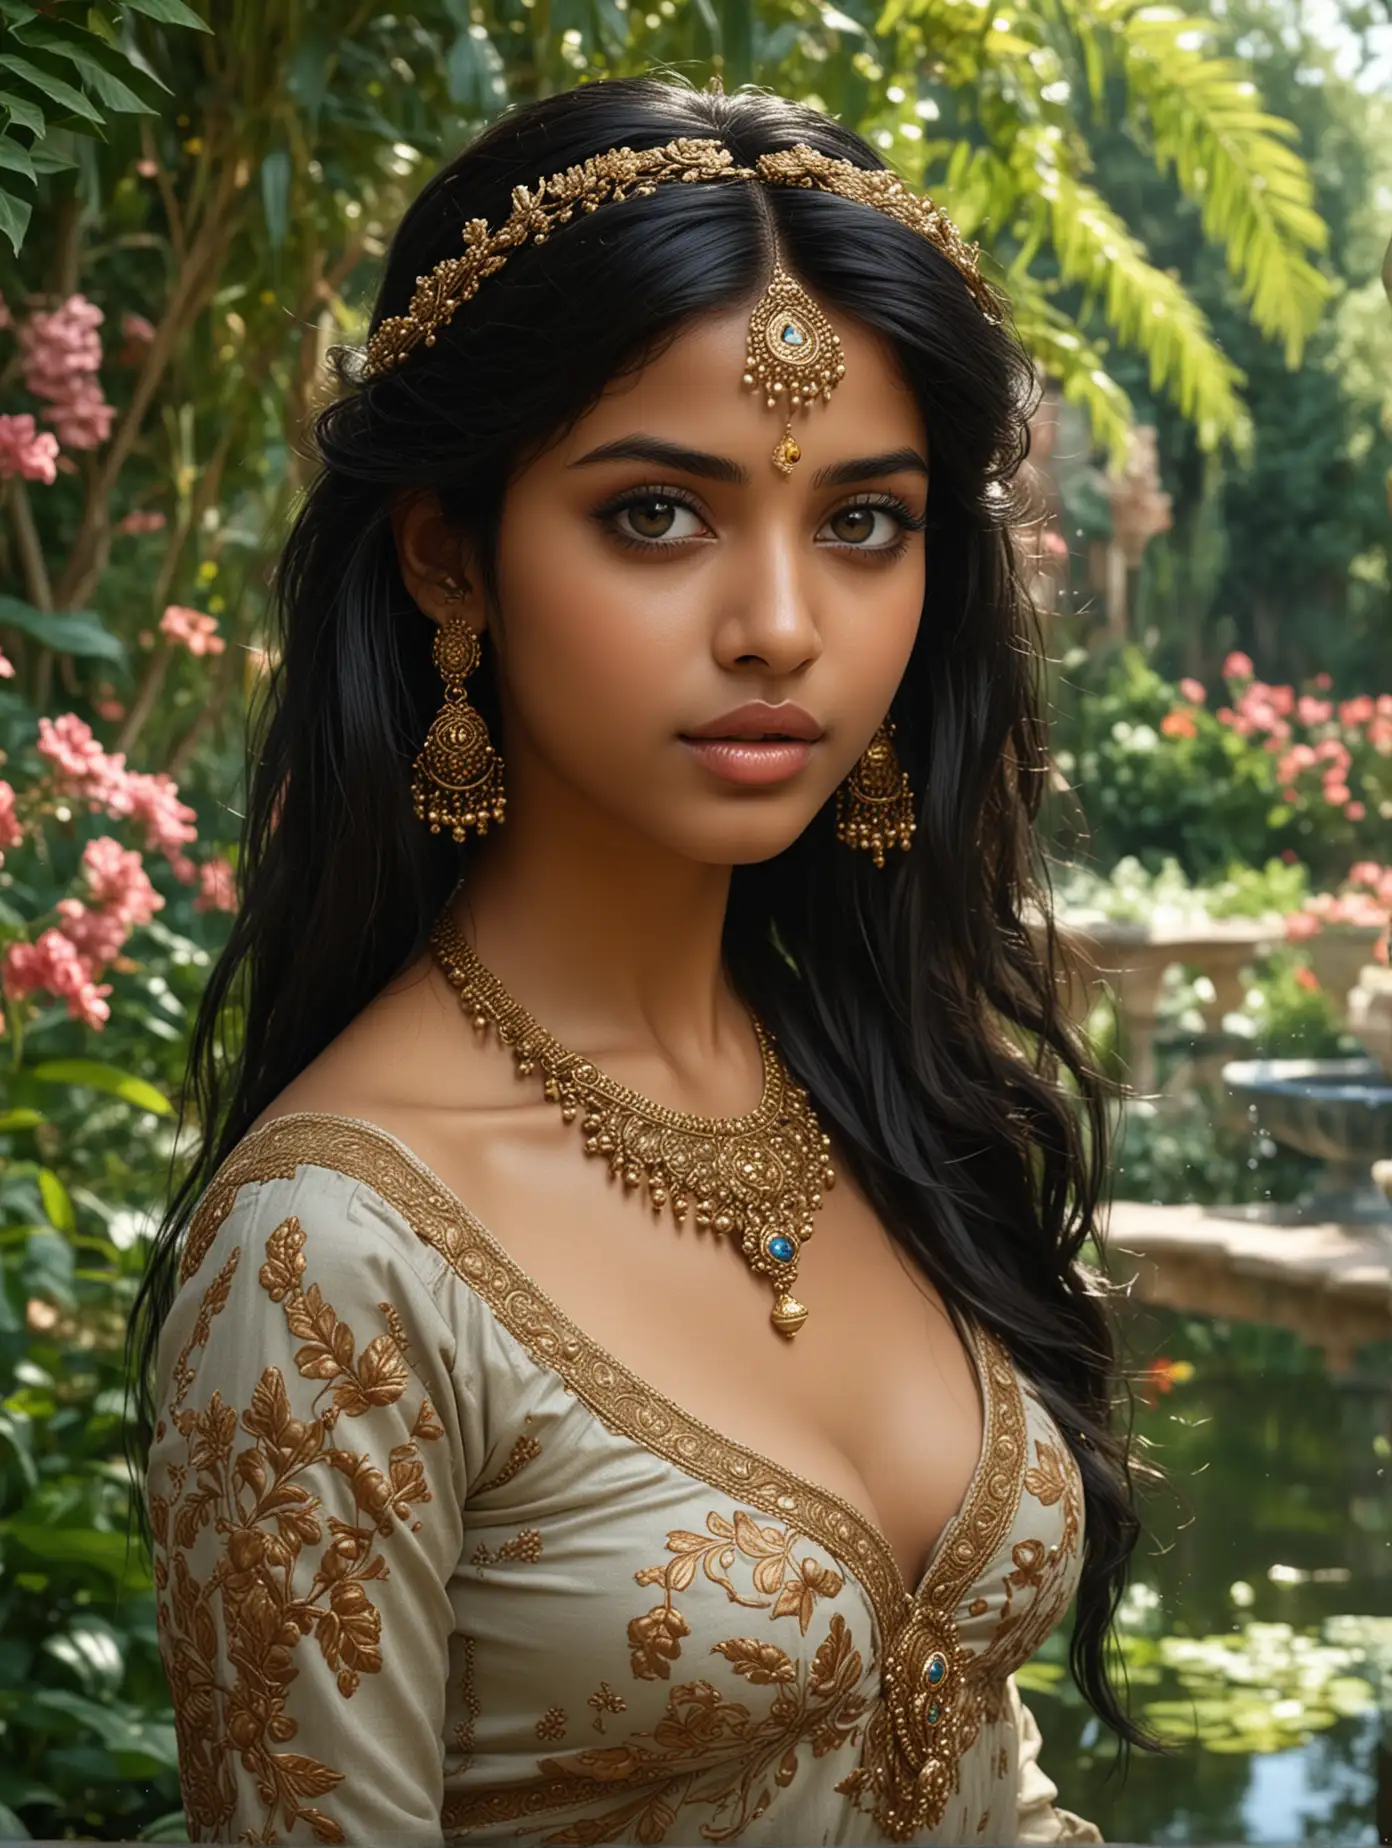 nude Tamil princess  , a girl of Arab origin, black eyes, bronze skin color, a hooked nose, plump lips.Her dark hair is styled in an elegant hairstyle. to be in a lush garden with exotic plants and flowers, where fountains and ponds add coolness and freshness. There may be elements of Arabic architecture around it, such as curved arches and elaborate patterns. The sky above the garden is clear and blue, and the air is filled with the aromas of flowers and spices. hyperrealism, detailed, 32k